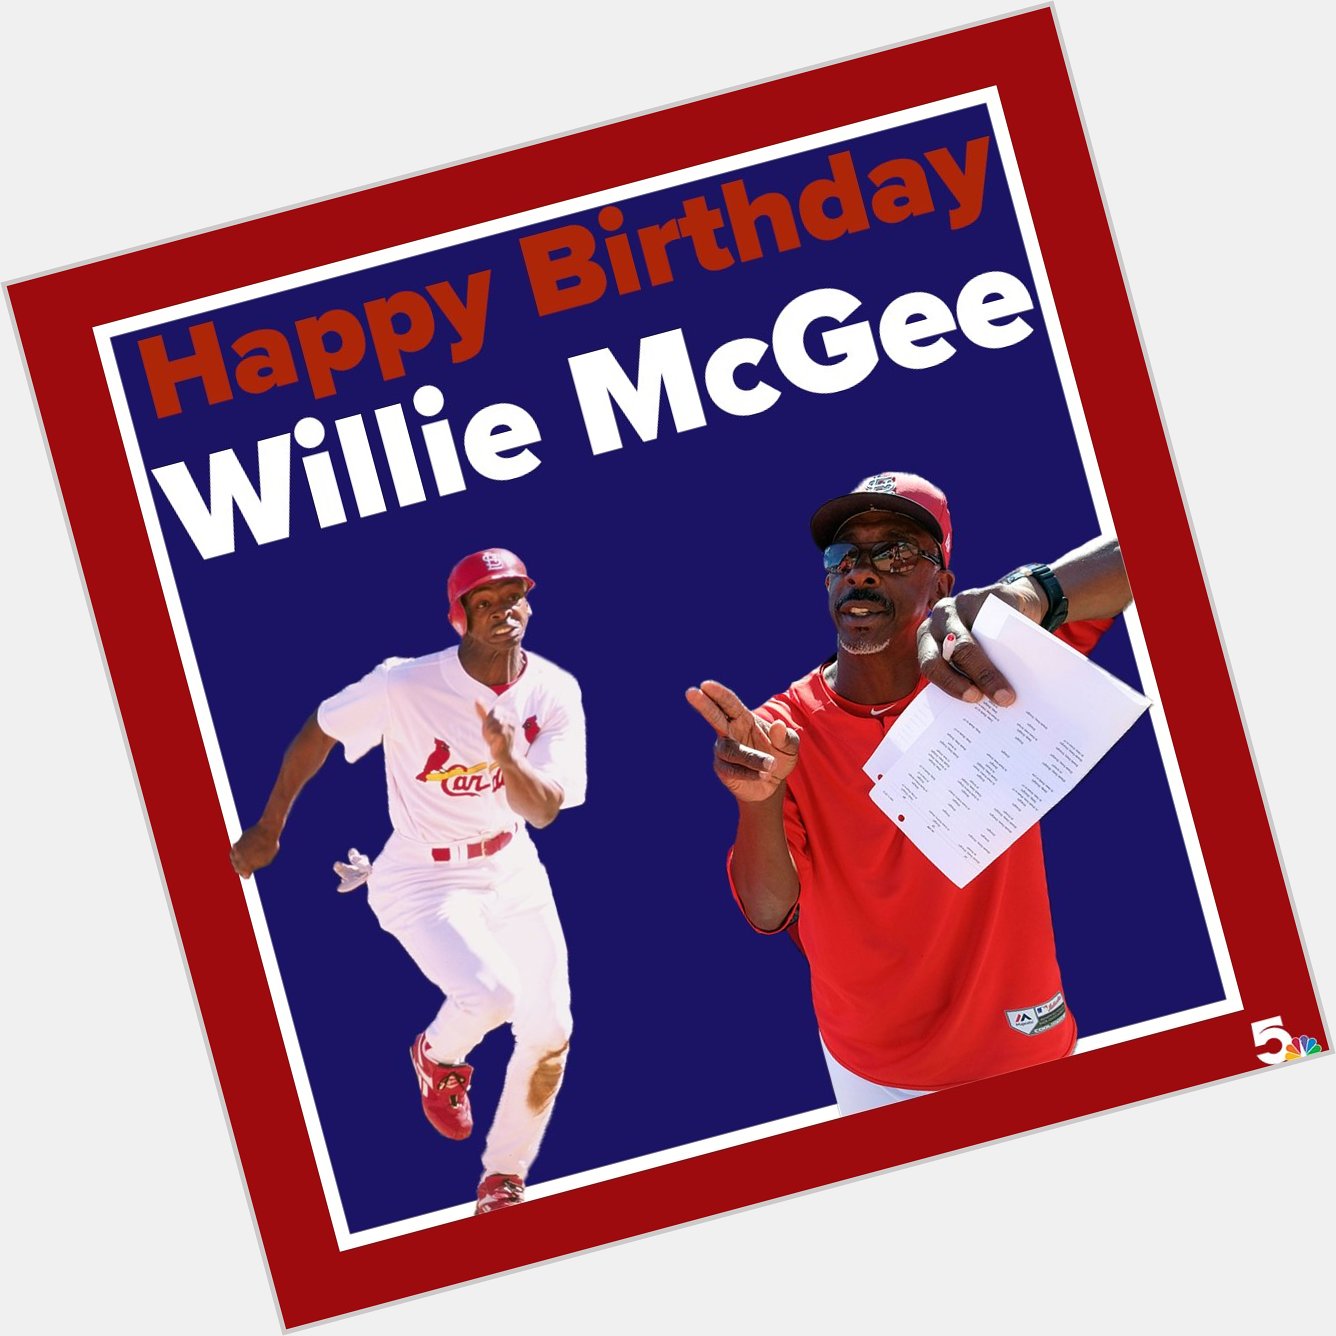 Happy 60th birthday to legend, Willie McGee!   